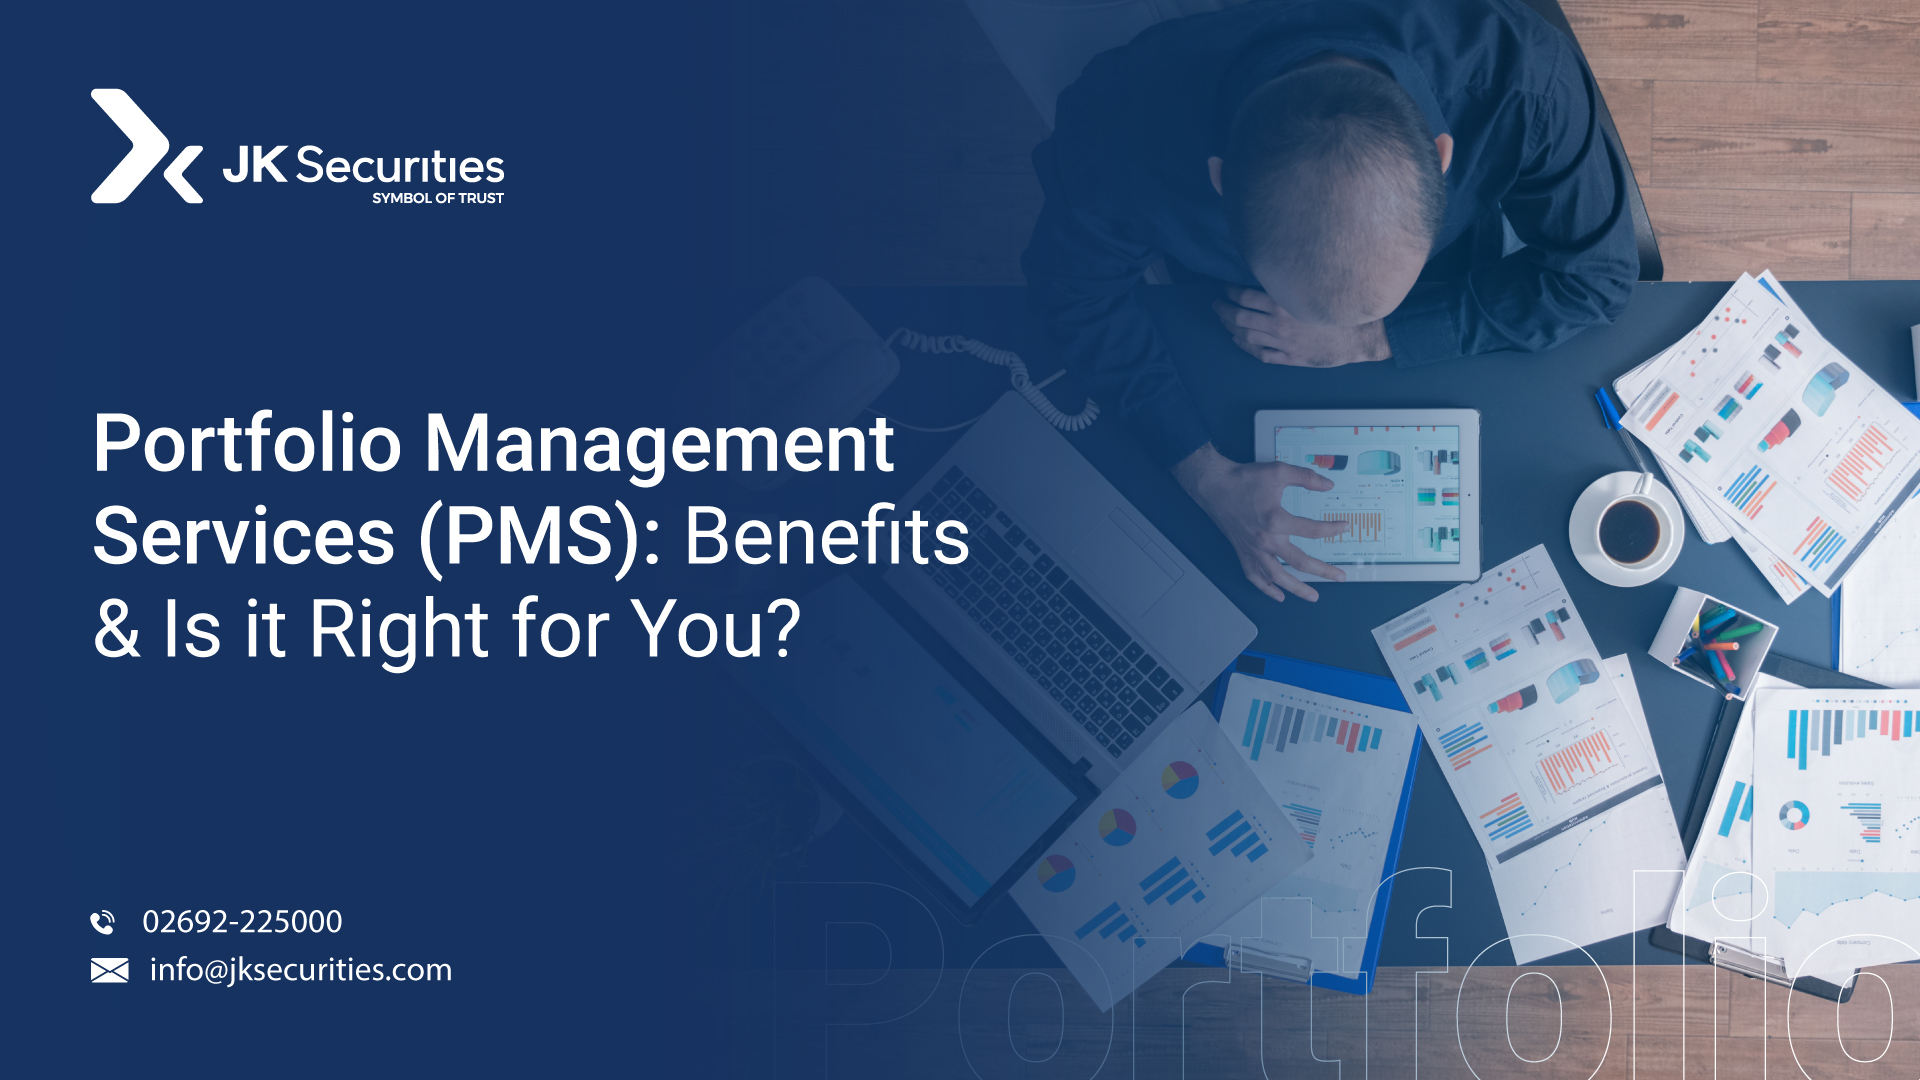 Portfolio Management Services (PMS): Benefits & Is it Right for You?